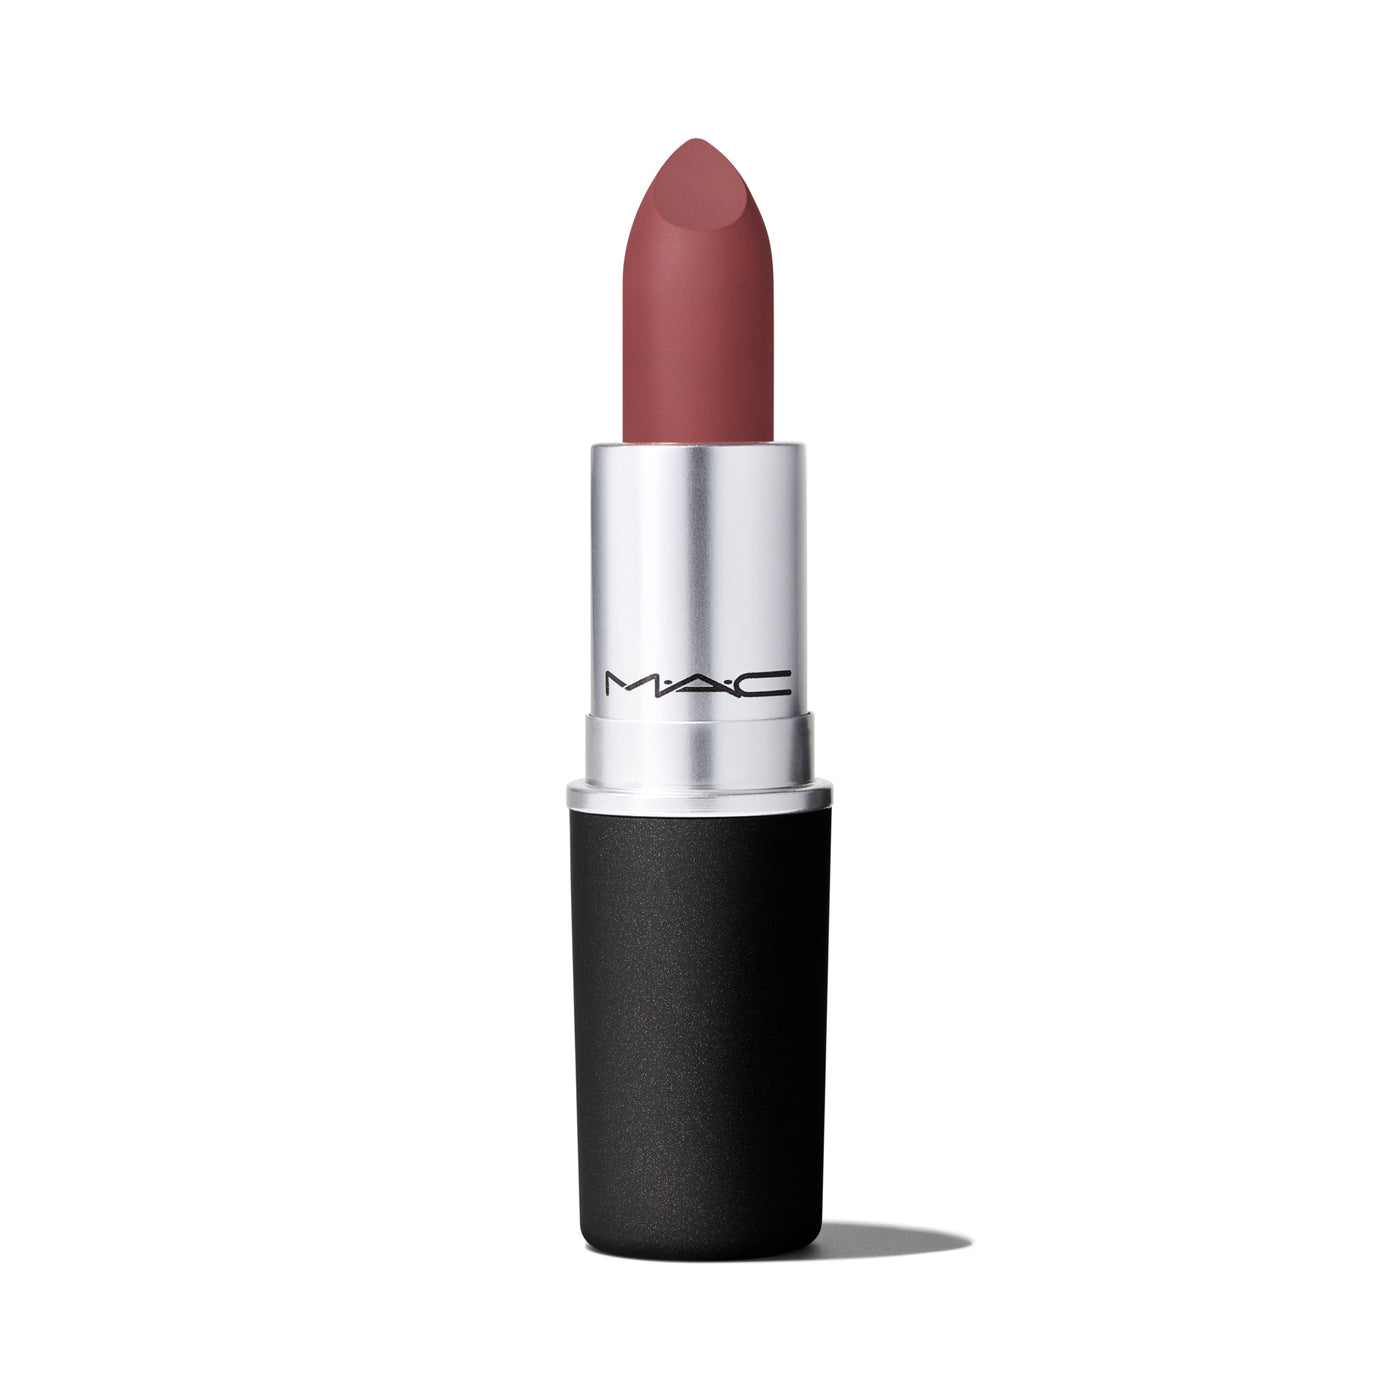 Shop The Latest Collection Of Mâ·Aâ·C Powder Kiss Lipstick In Lebanon